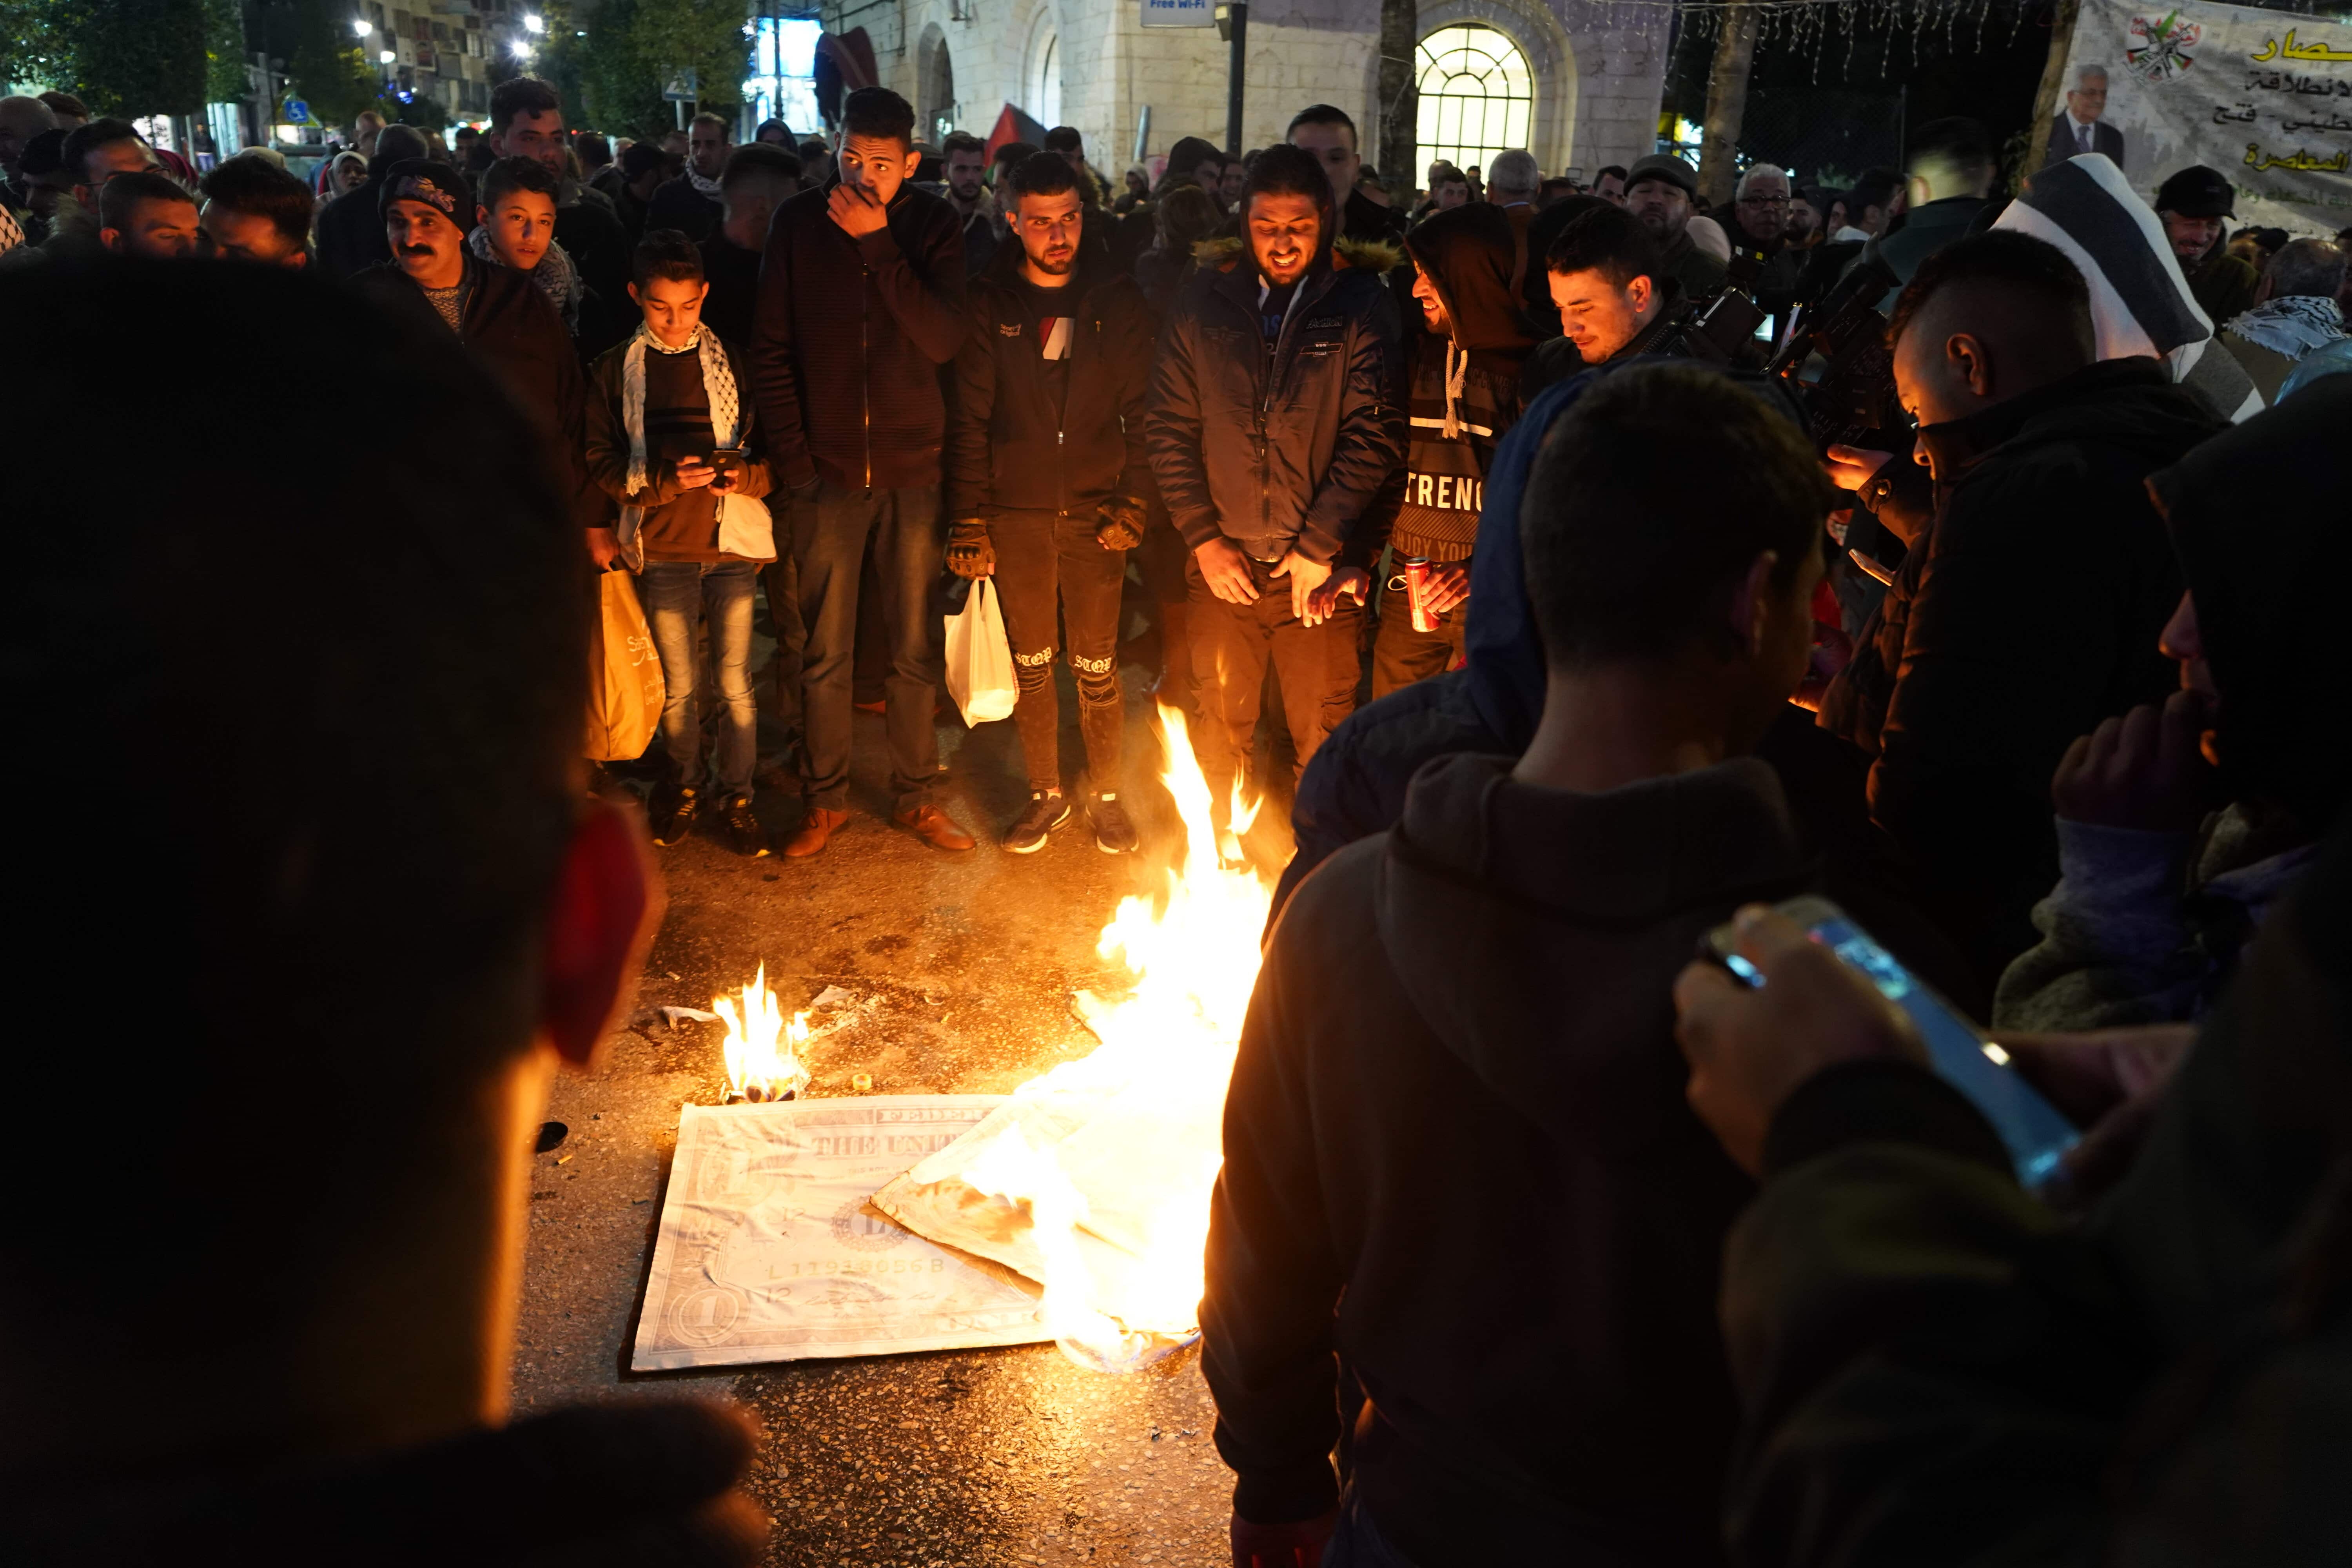 Palestinians protest in Ramallah